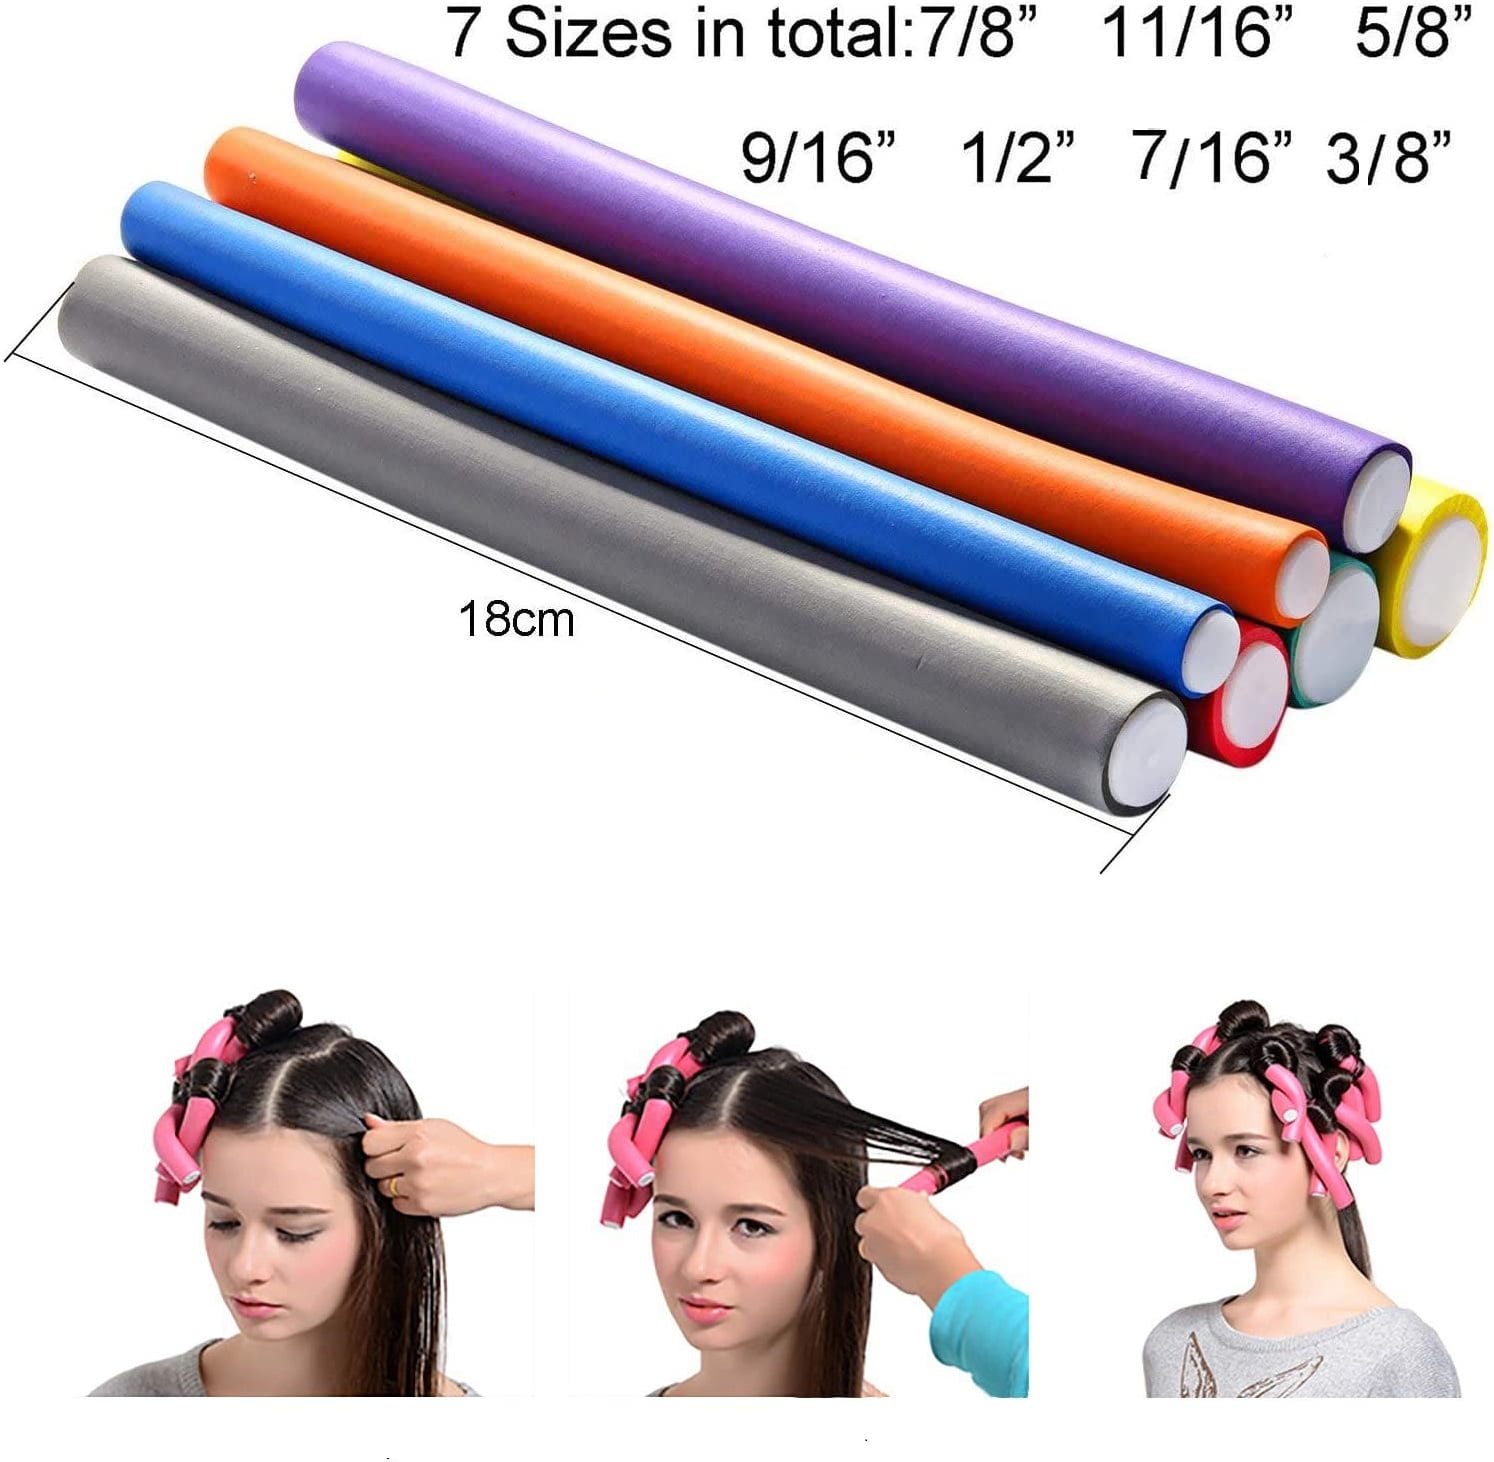 42 Pcs Foam Hair Curlers Rods no Heat Flexible Hair Rollers,Sponge Rollers  Curlers with Hair Tools,7 Size Hair Styling Tools for Hair DIY SET -  Walmart.com